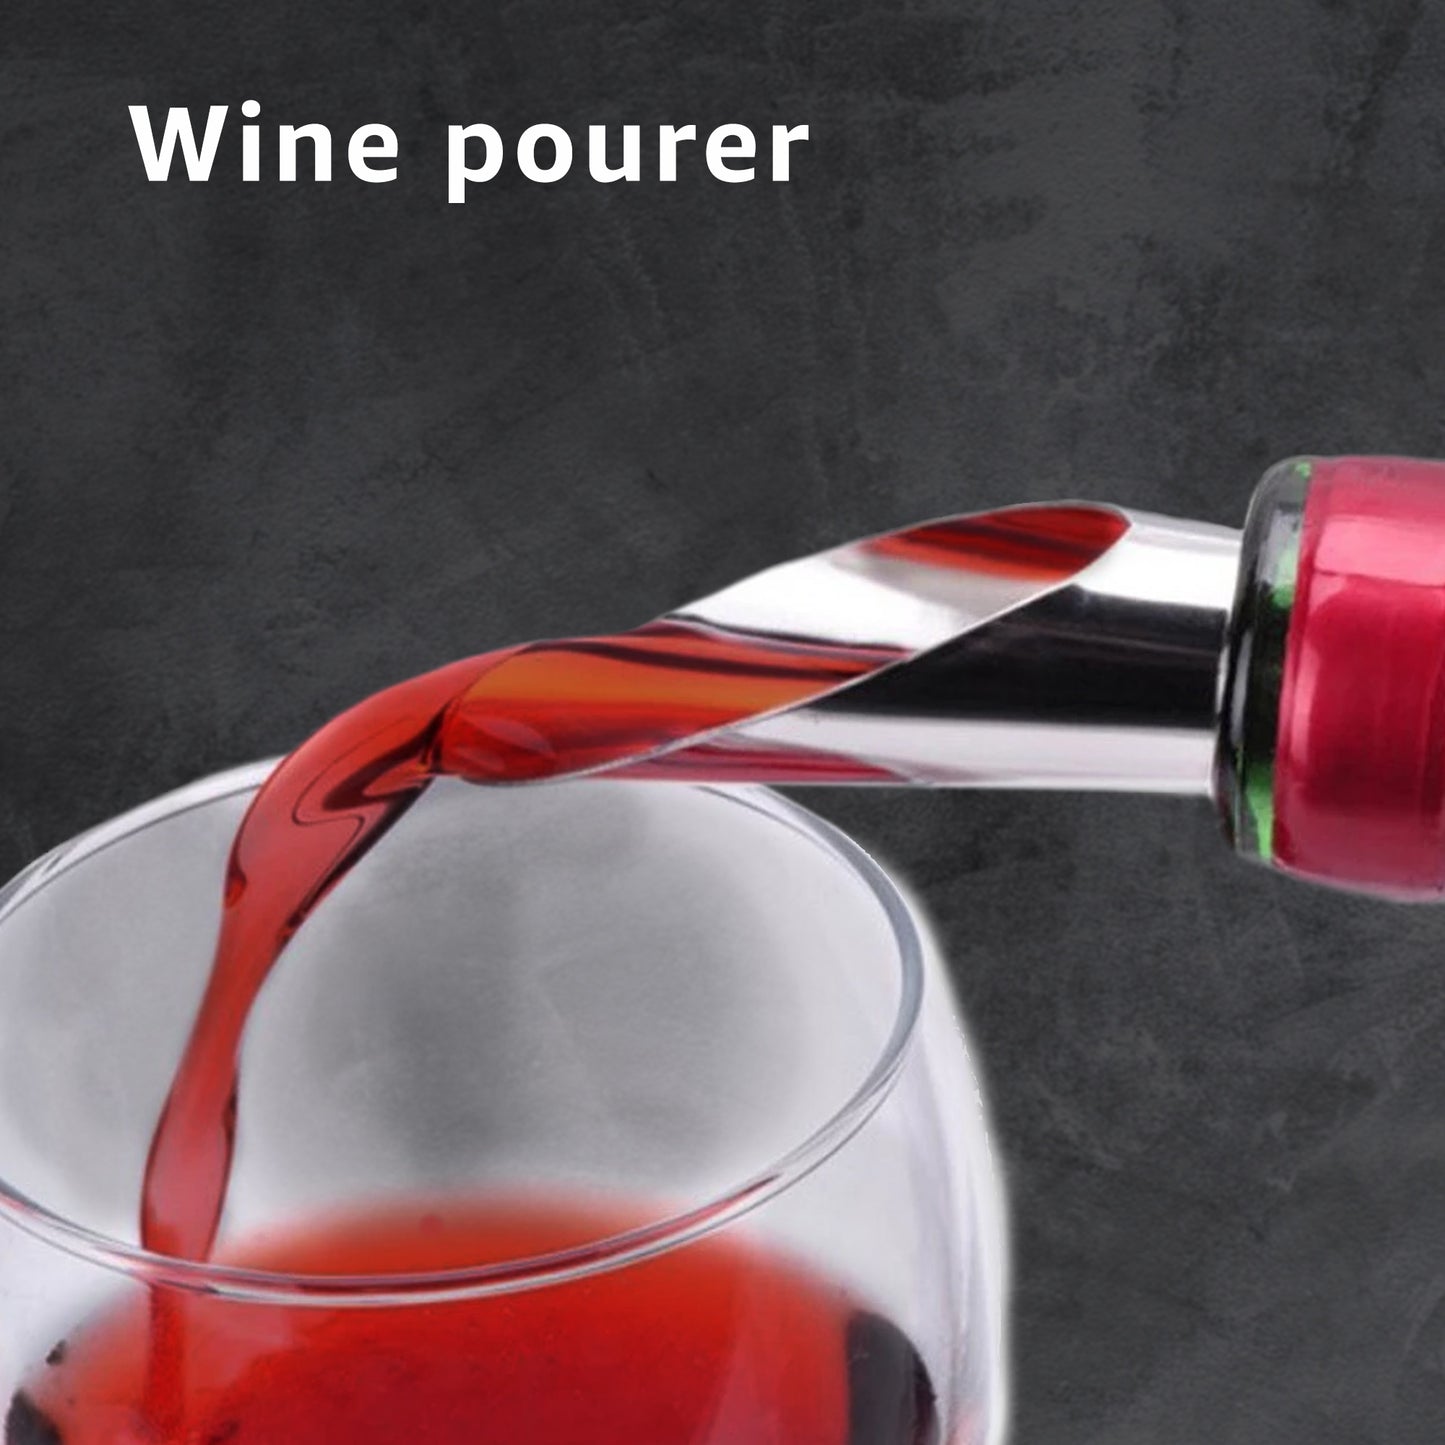 WINE SET - Accessories Designed to Optimize Your Wine-Drinking Experience